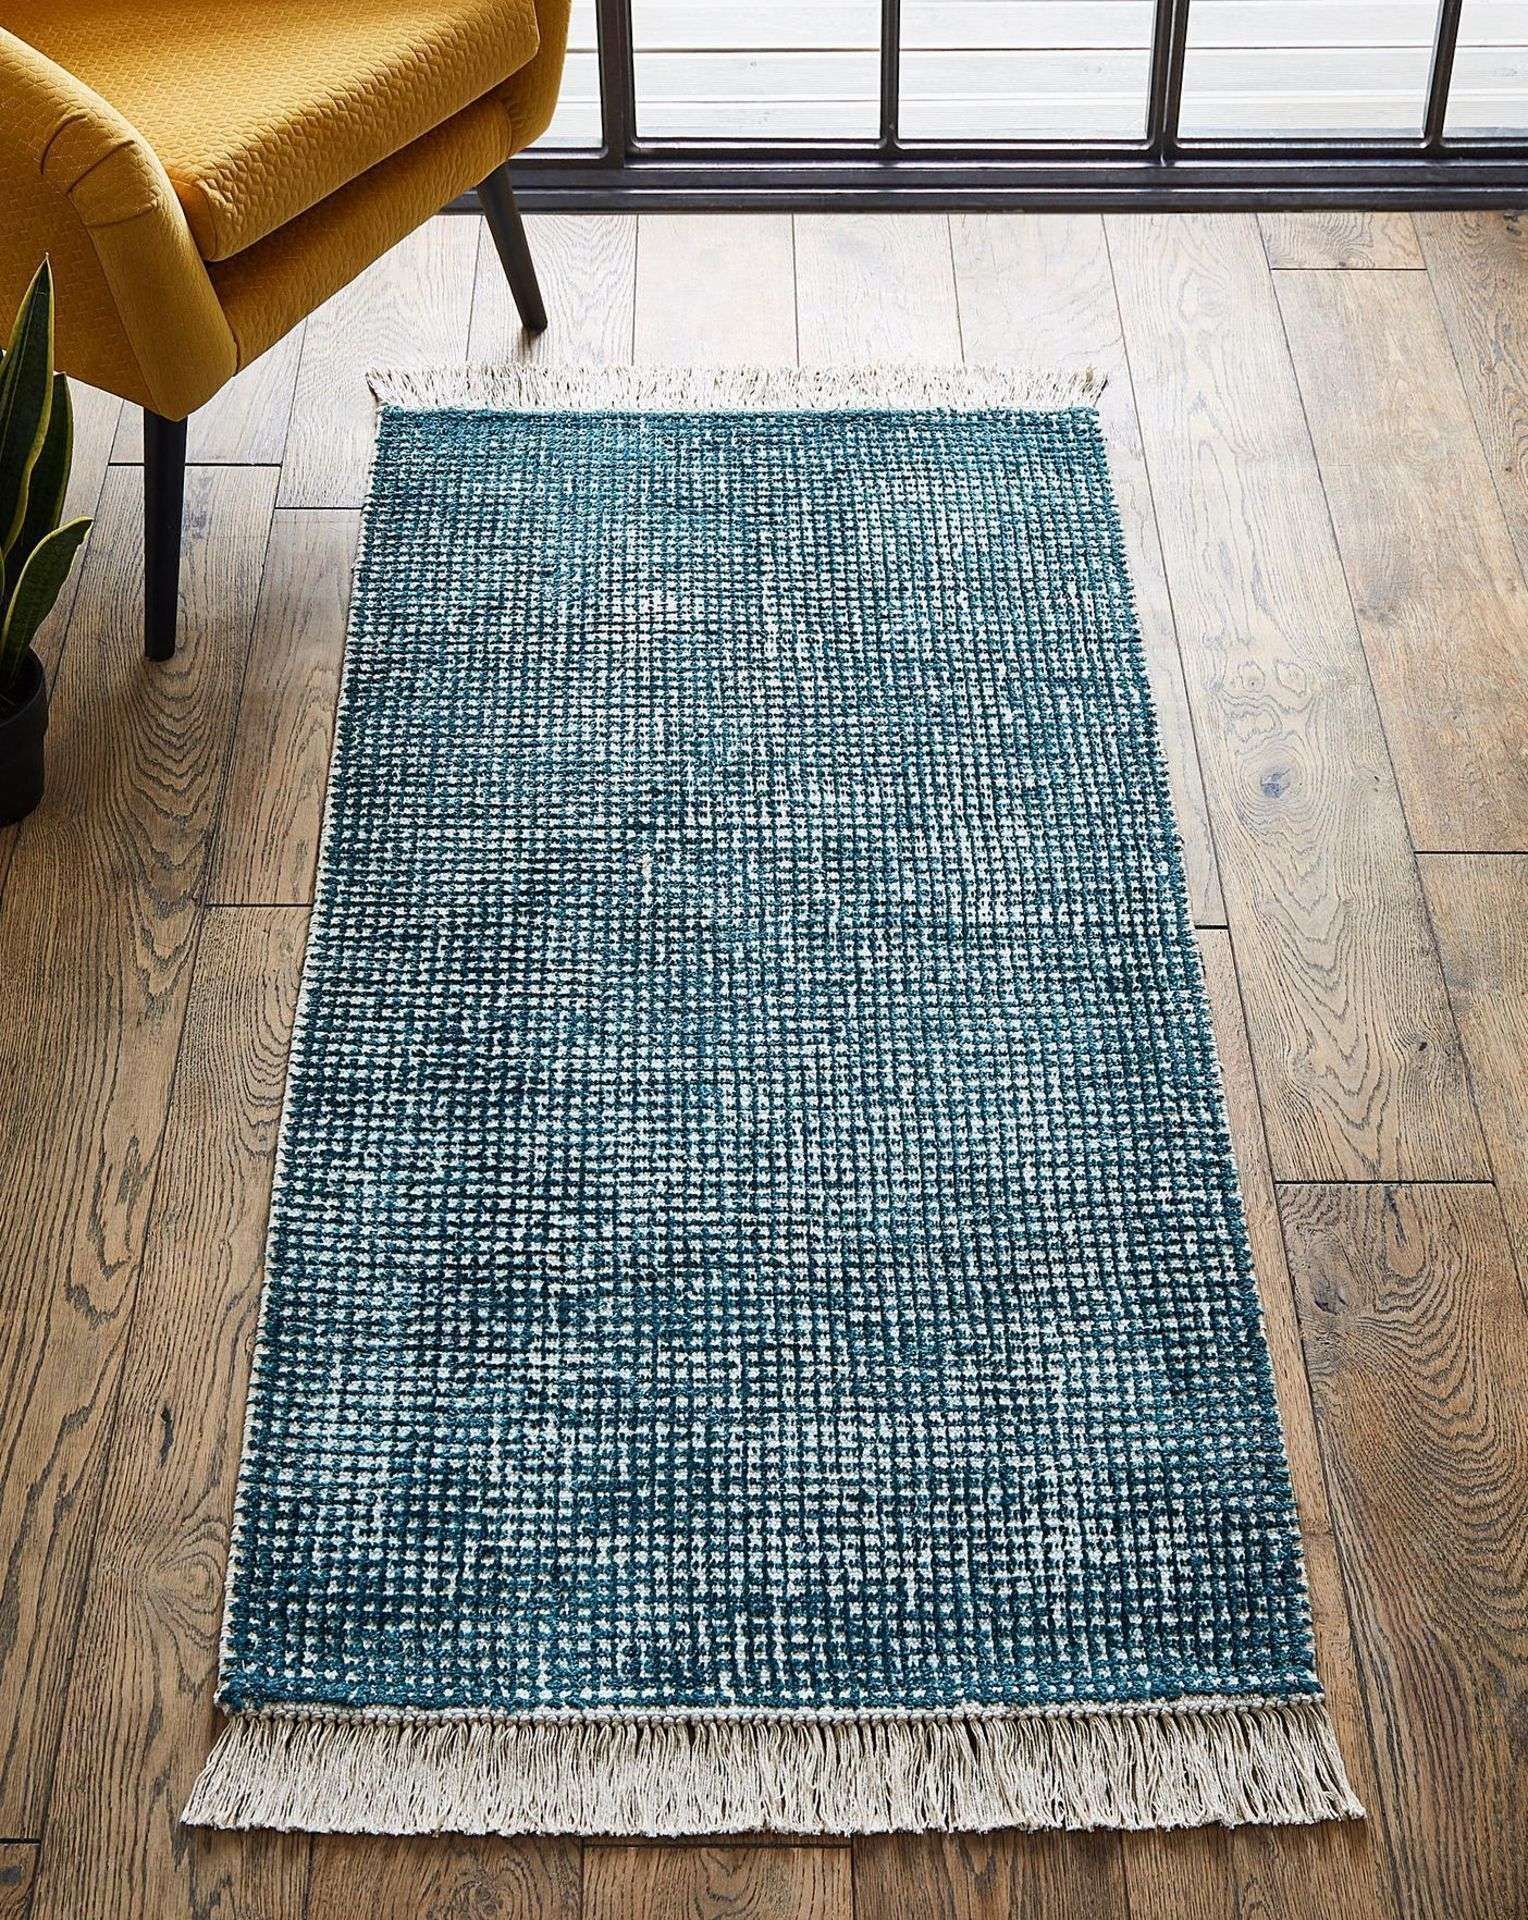 2x BRAND NEW Hallie Woven Fringe Rug 120CM X 170CM. TEAL. RRP £89 EACH. A woven design that is